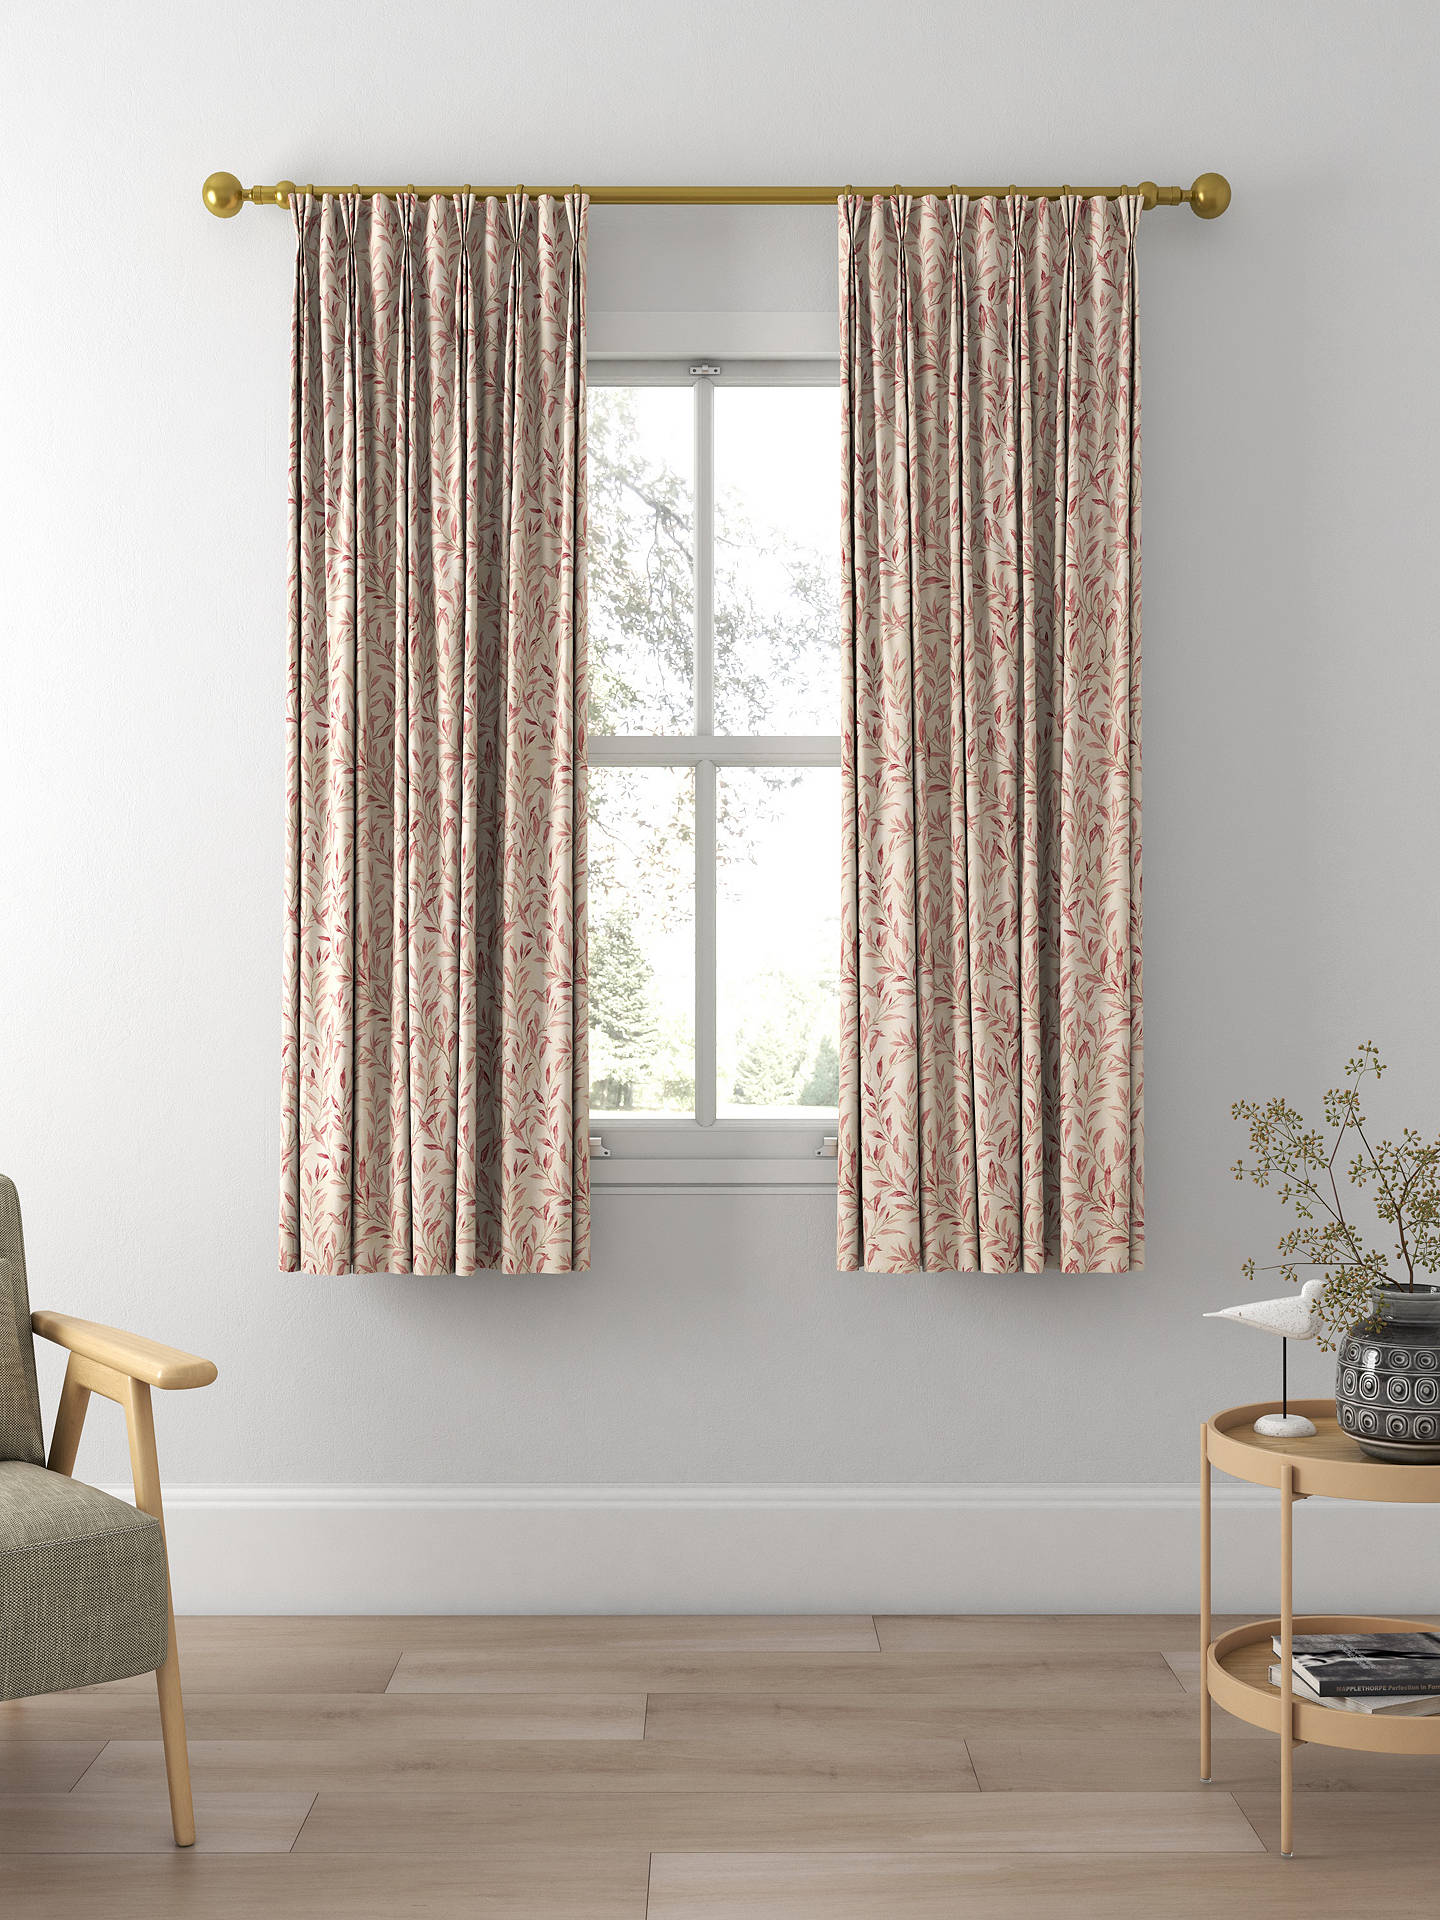 Sanderson Osier Made to Measure Curtains, Rosewood/Sepia